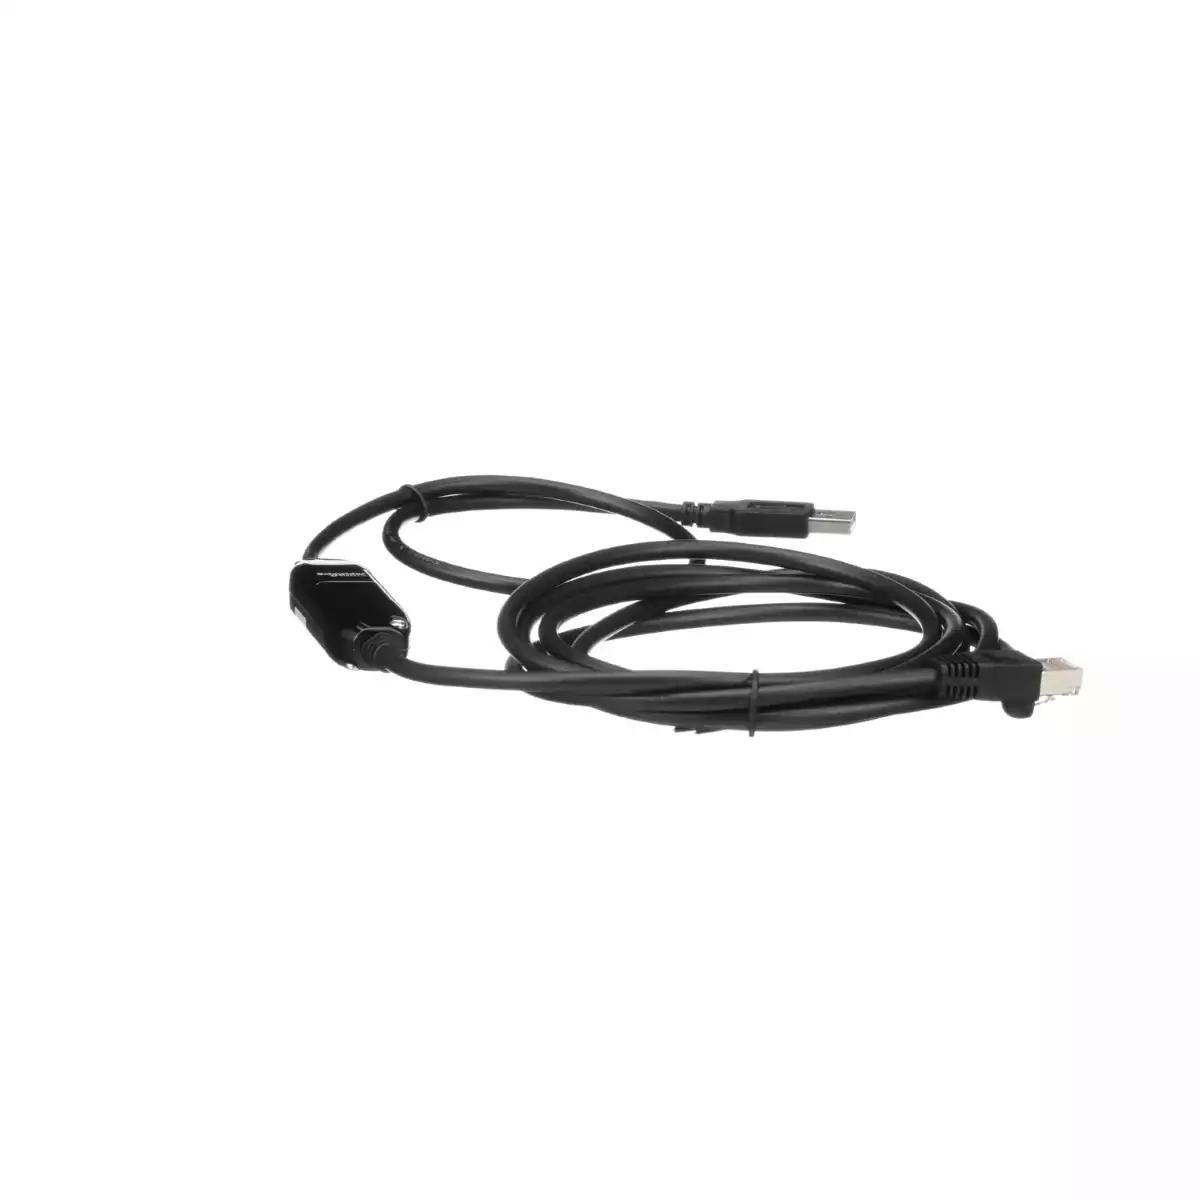 Schneider Electric connection cable USB/RJ45 - for connection between PC and drive